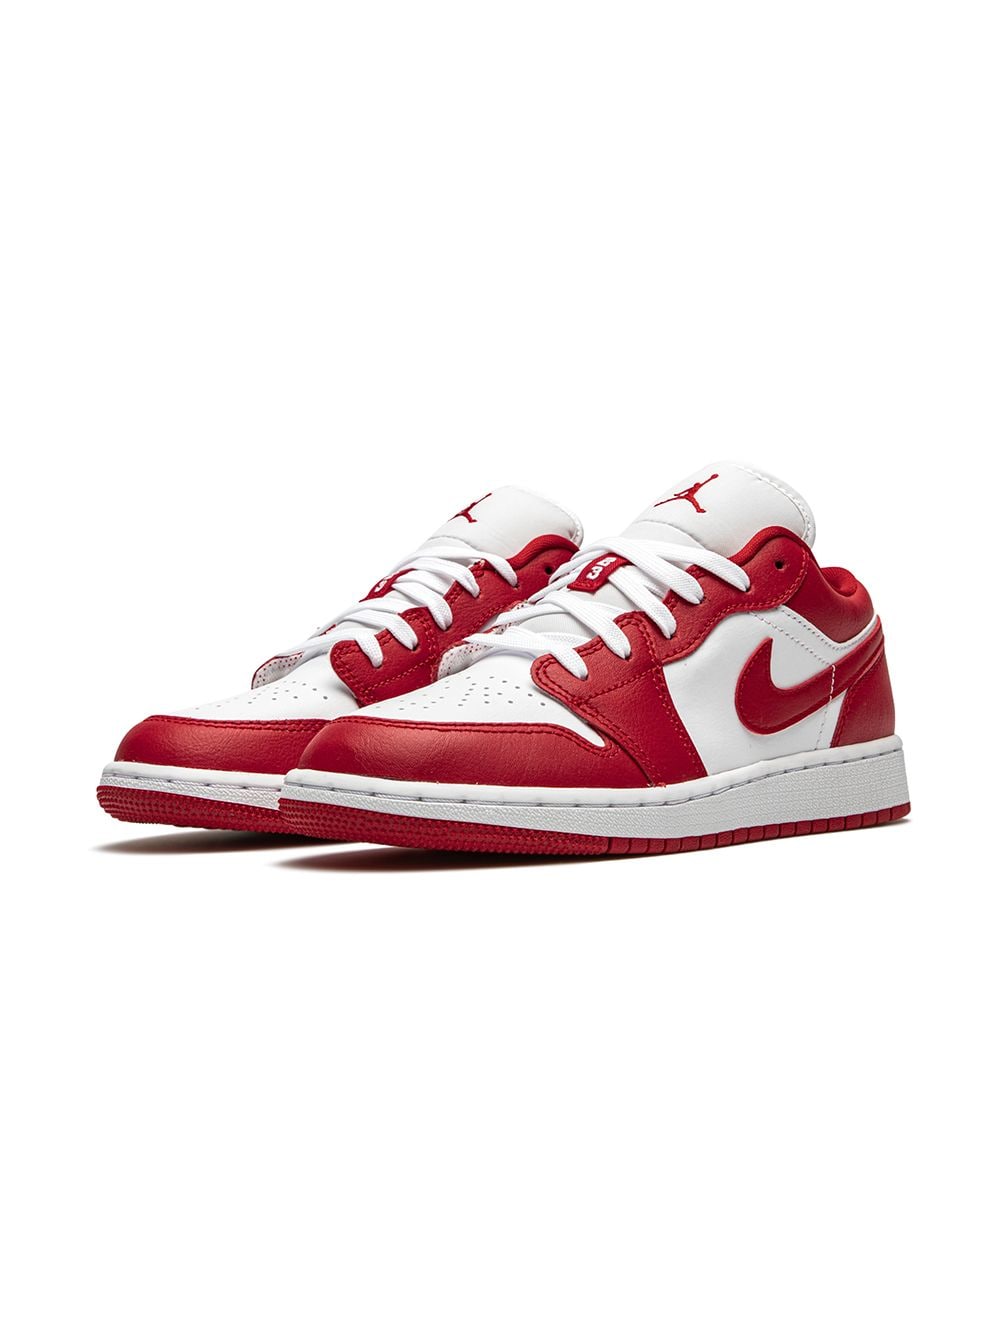 red and white air jordan ones